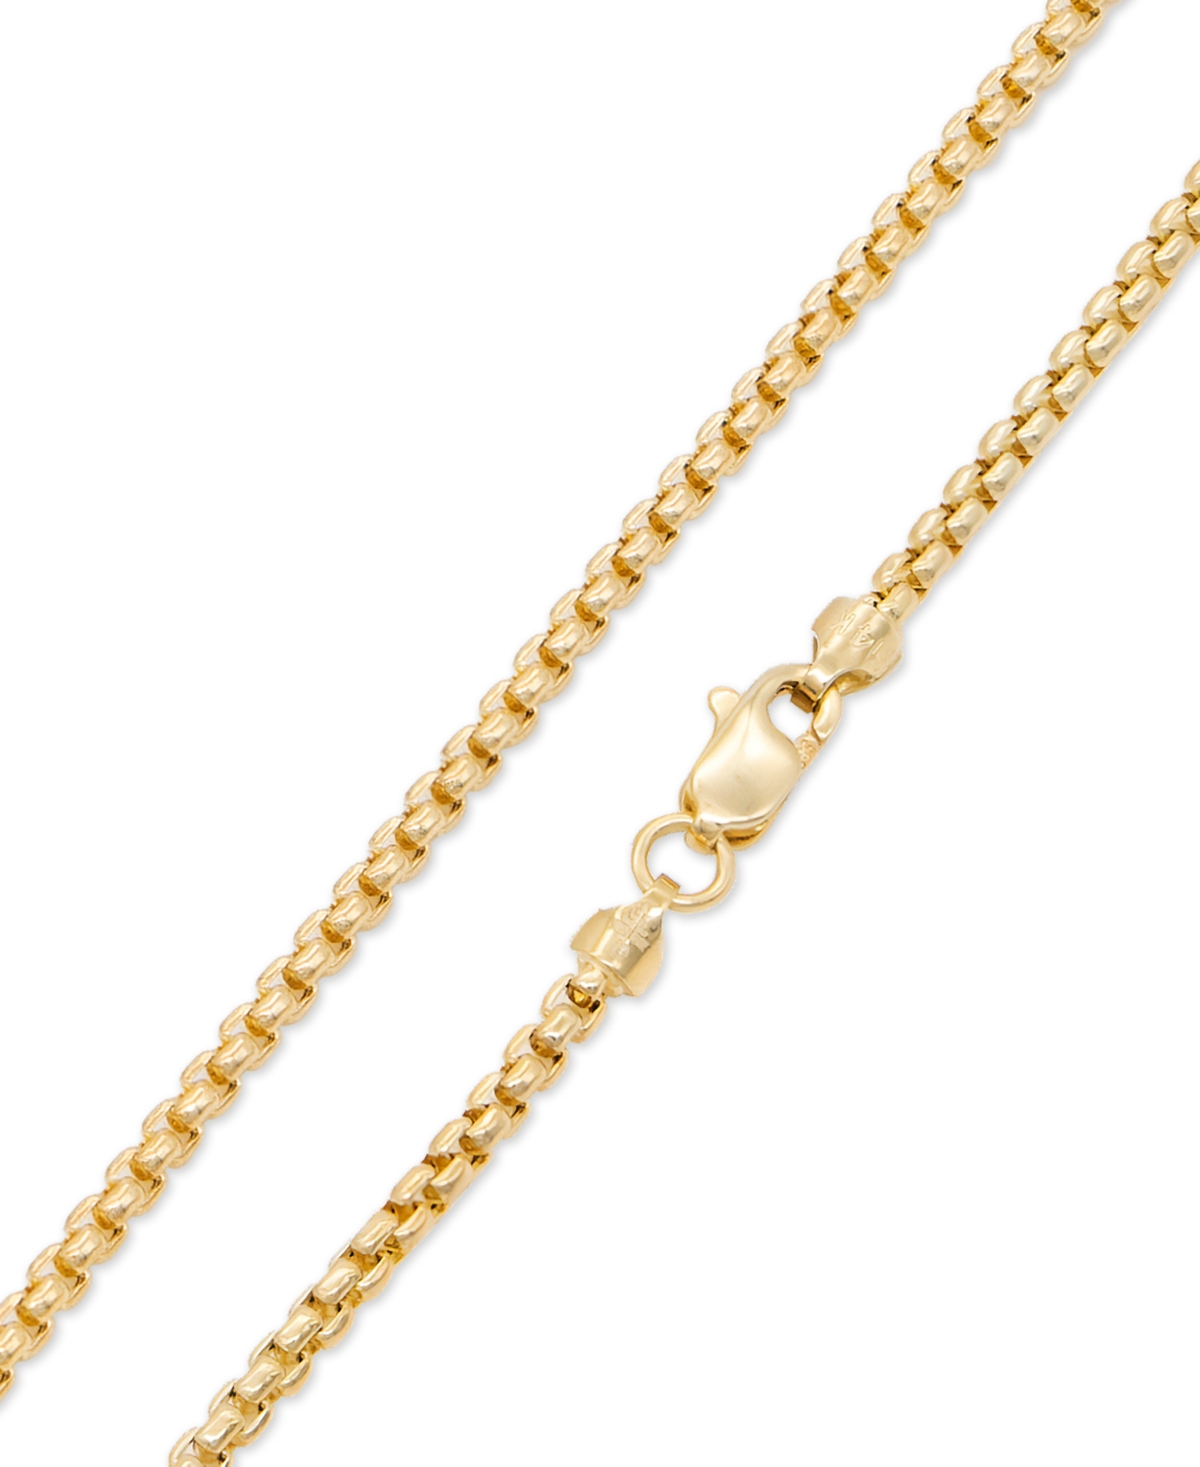 14K Gold Box Round 2mm Chain Bracelet, 6.5", approx. 1.7grams - Gold